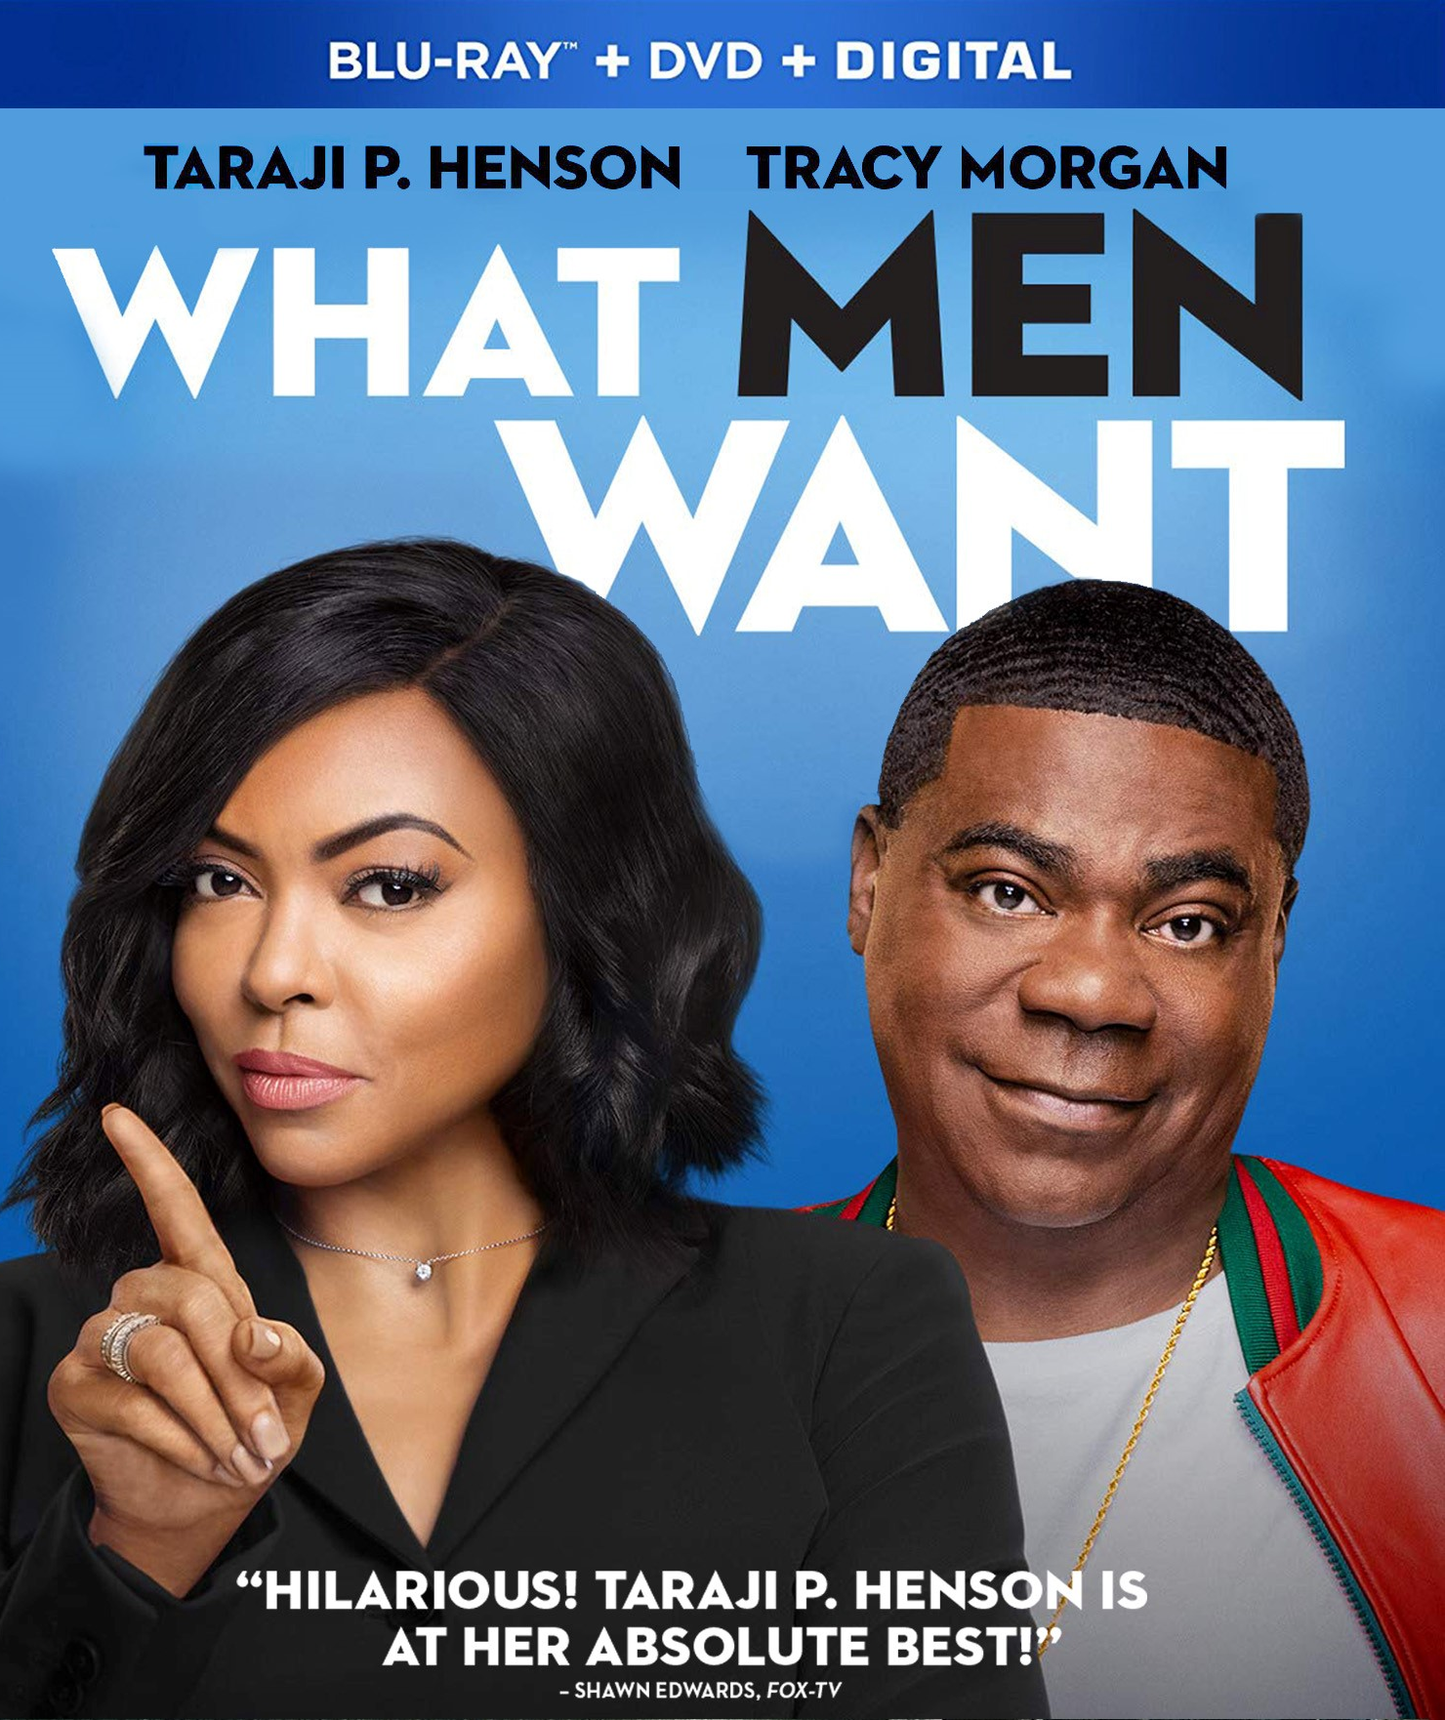 What Men Want - Blu-ray Comedy 2019 NR